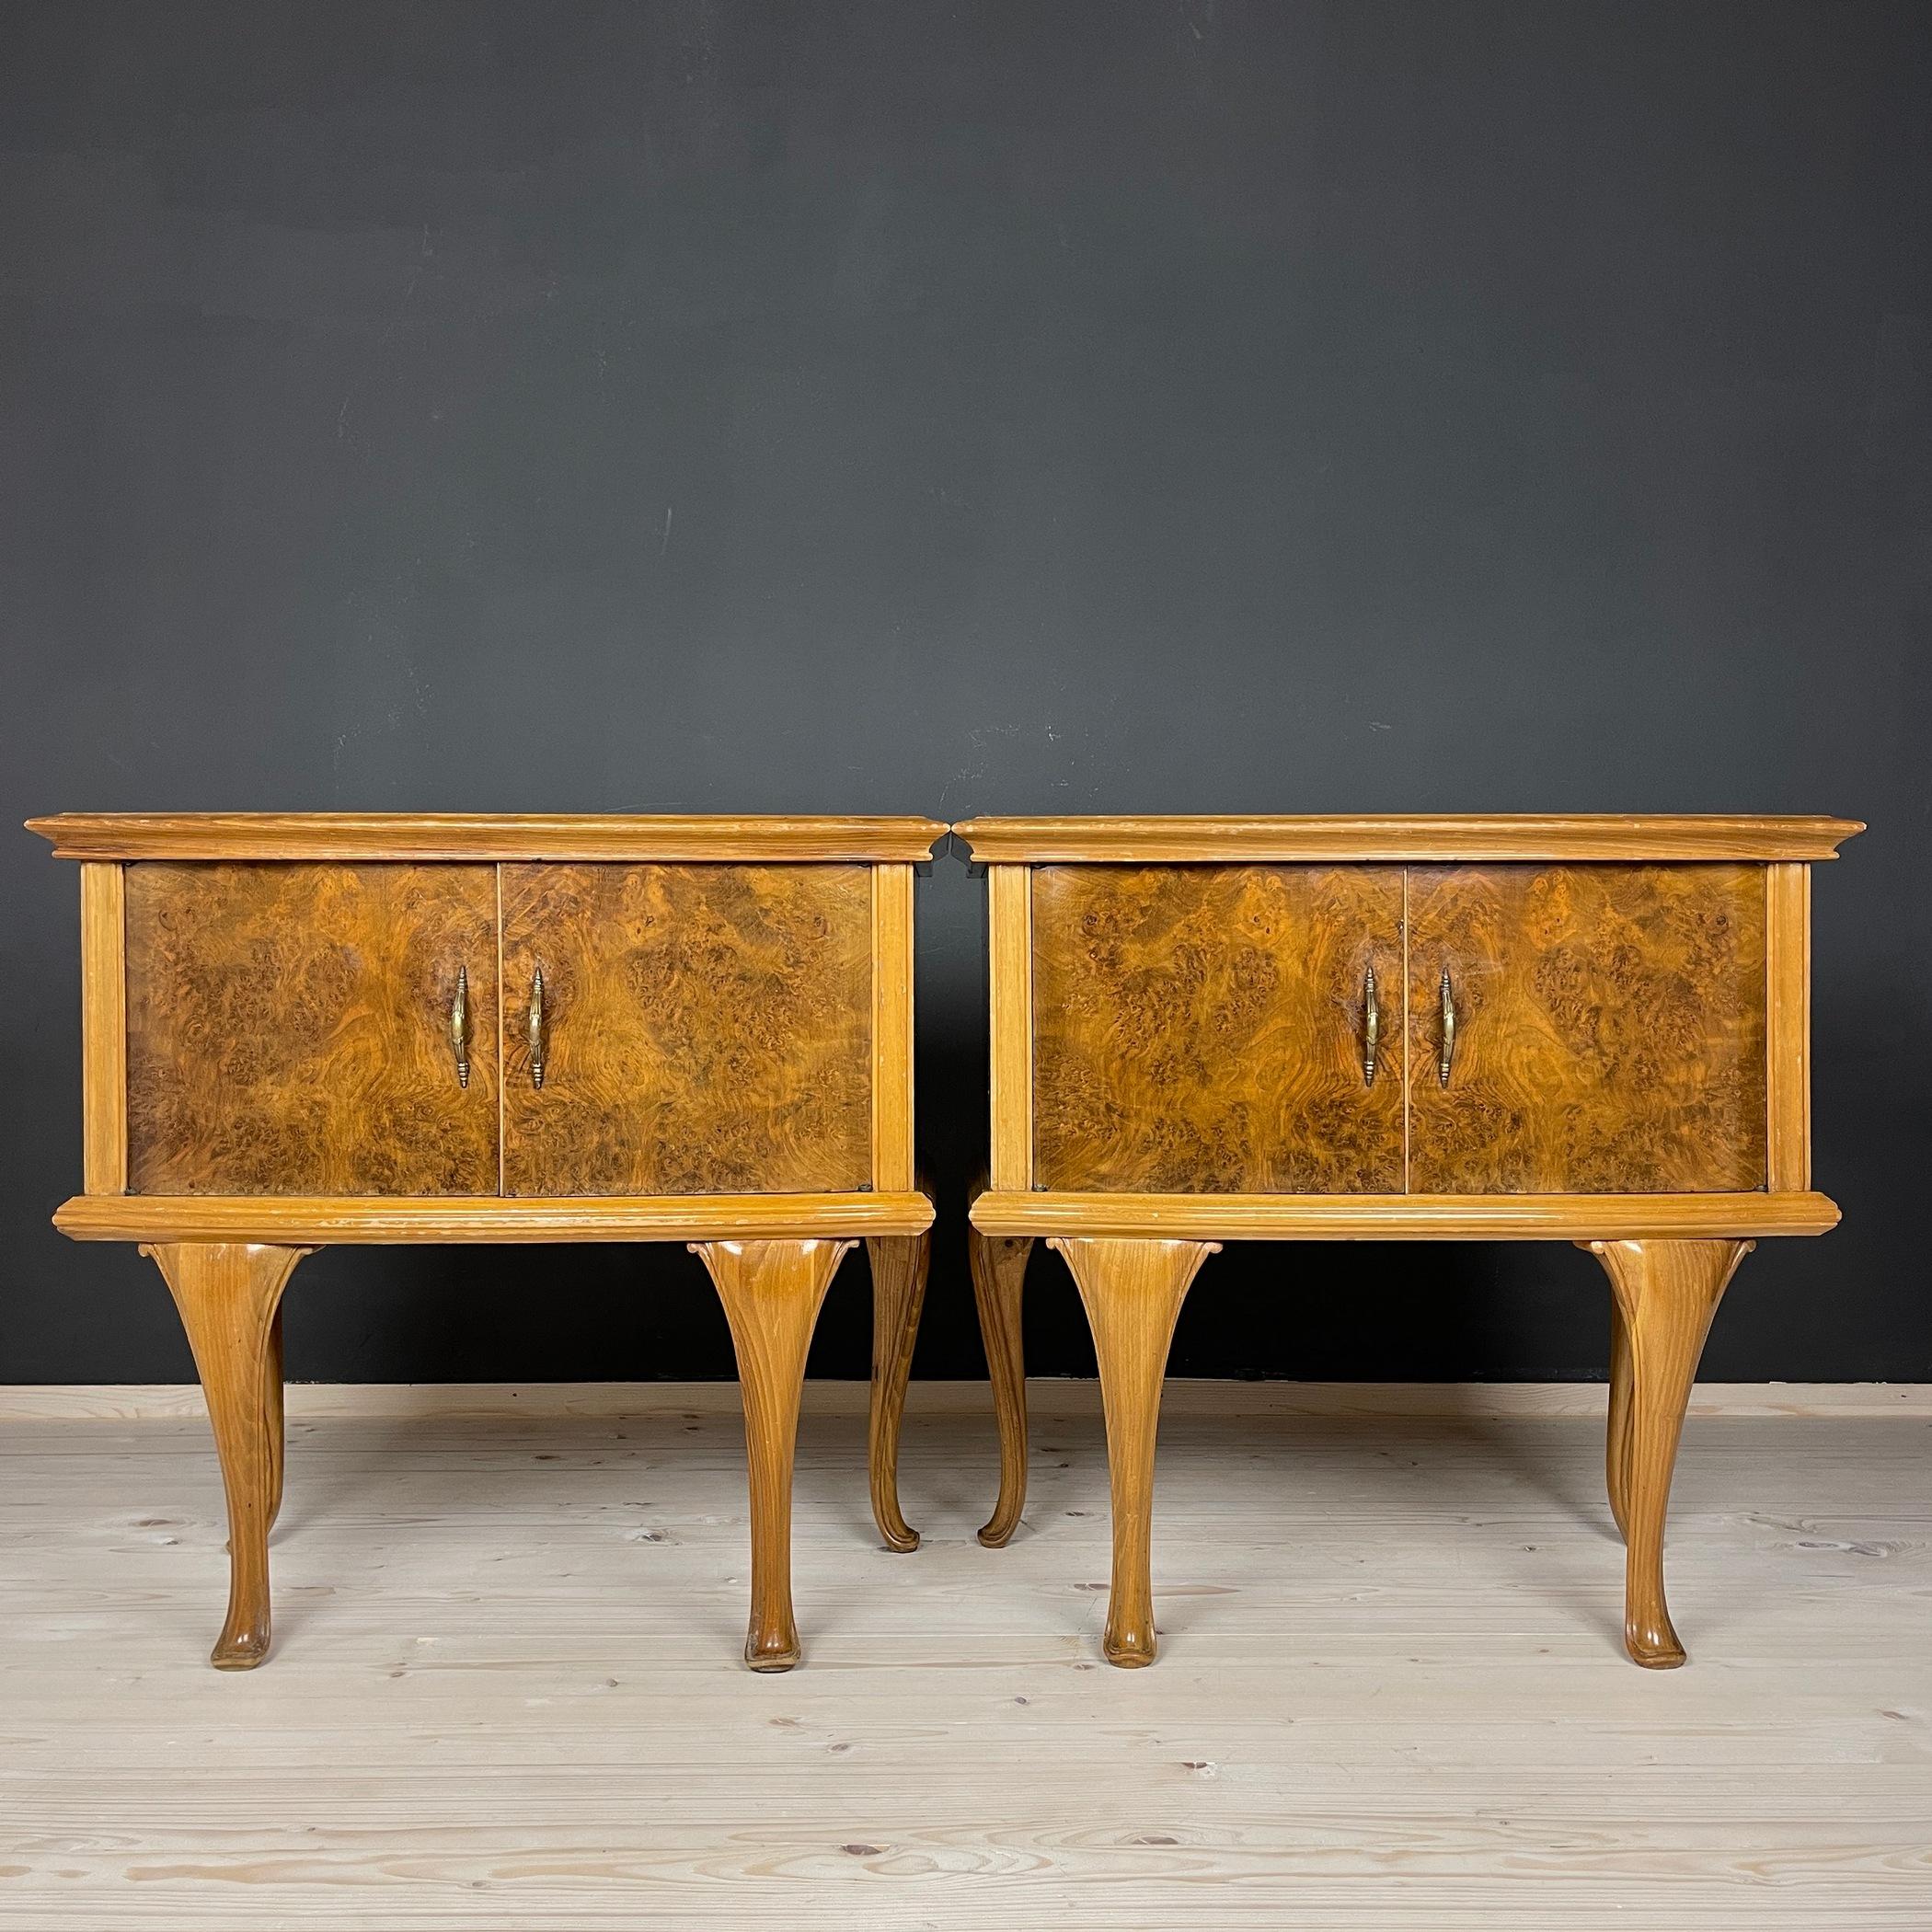 Pair beautiful bedside tables were made in the 1950s in Italy. Made of solid wood, plywood. Original fittings. They have been preserved to this day in good condition. Despite their venerable age, they look excellent. There are signs of wear and tear